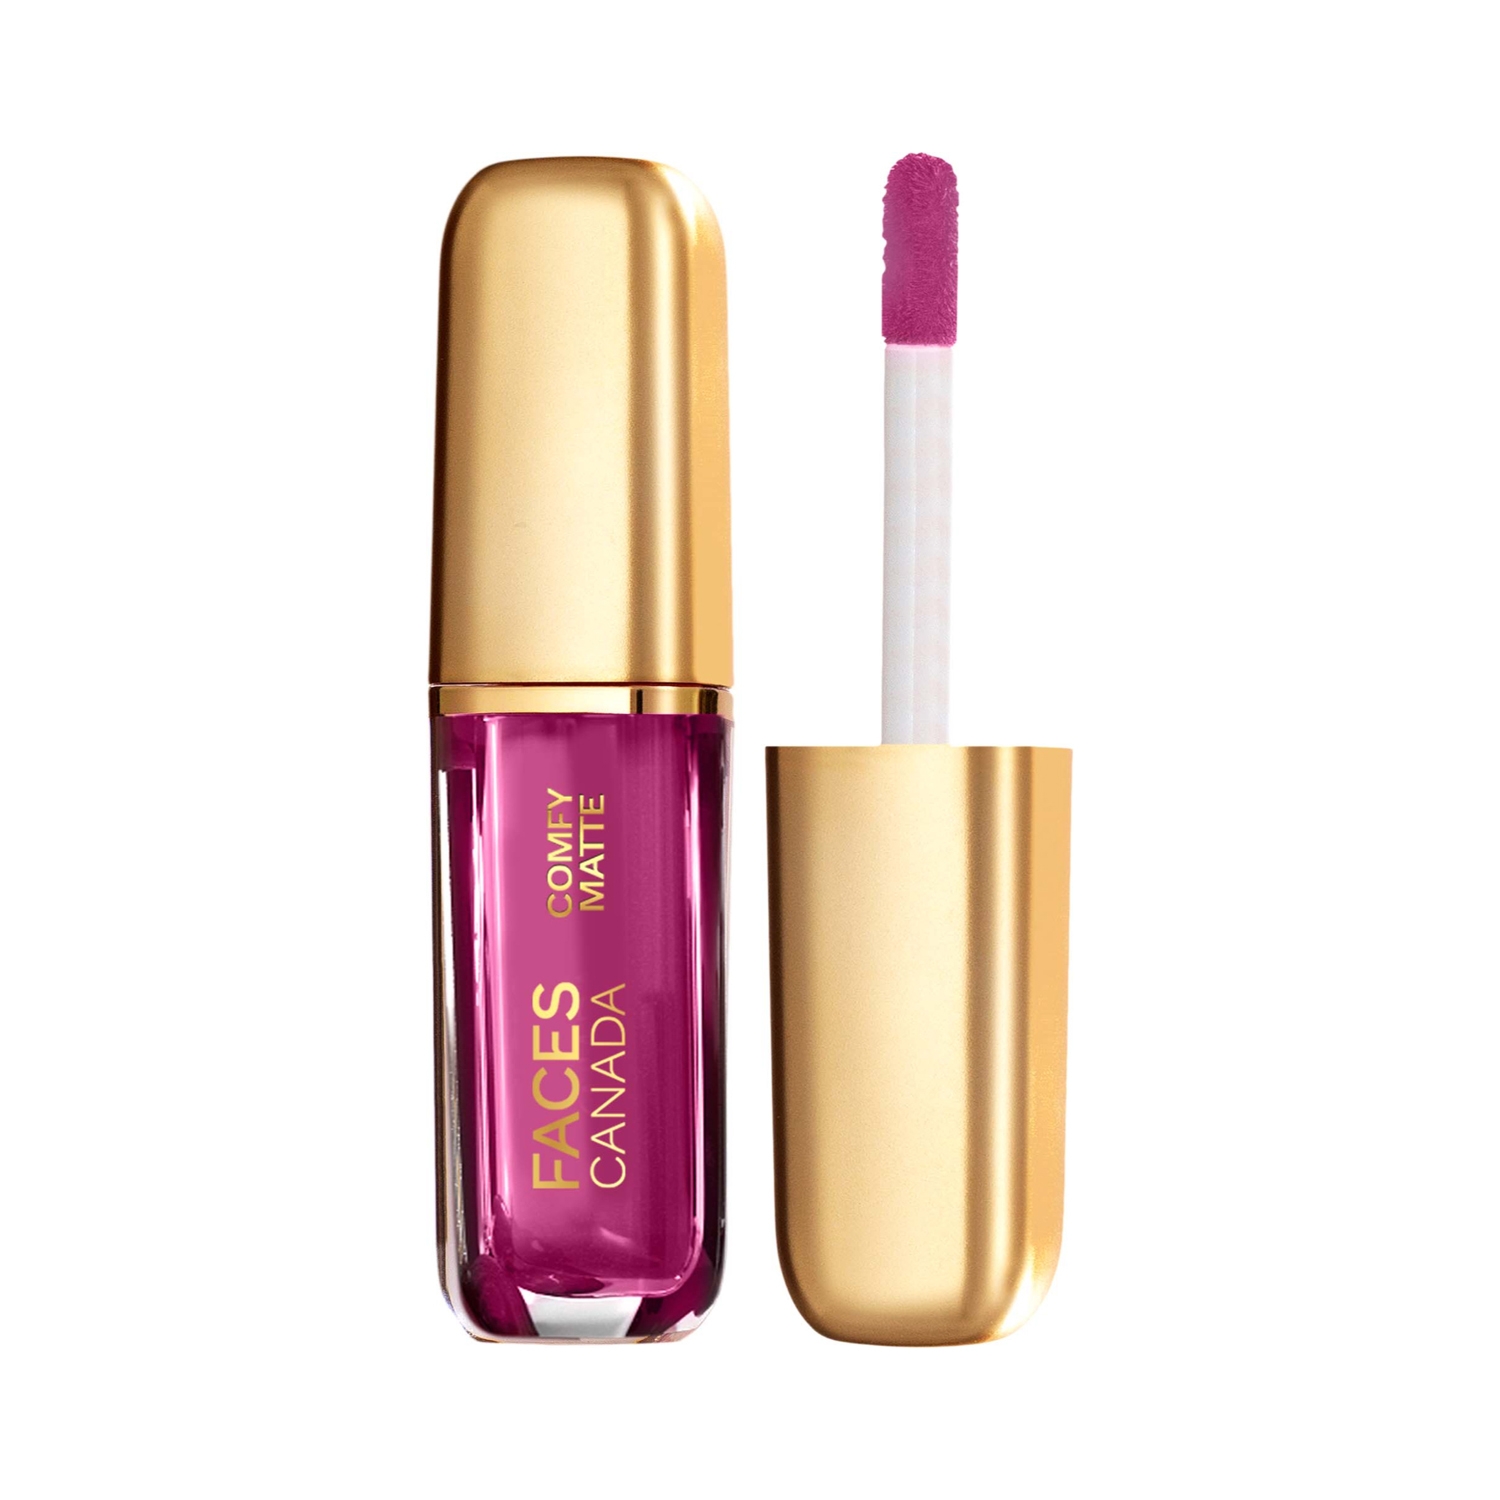 Faces Canada | Faces Canada Comfy Matte Lip Color - 03 End Of Story (1.2ml)